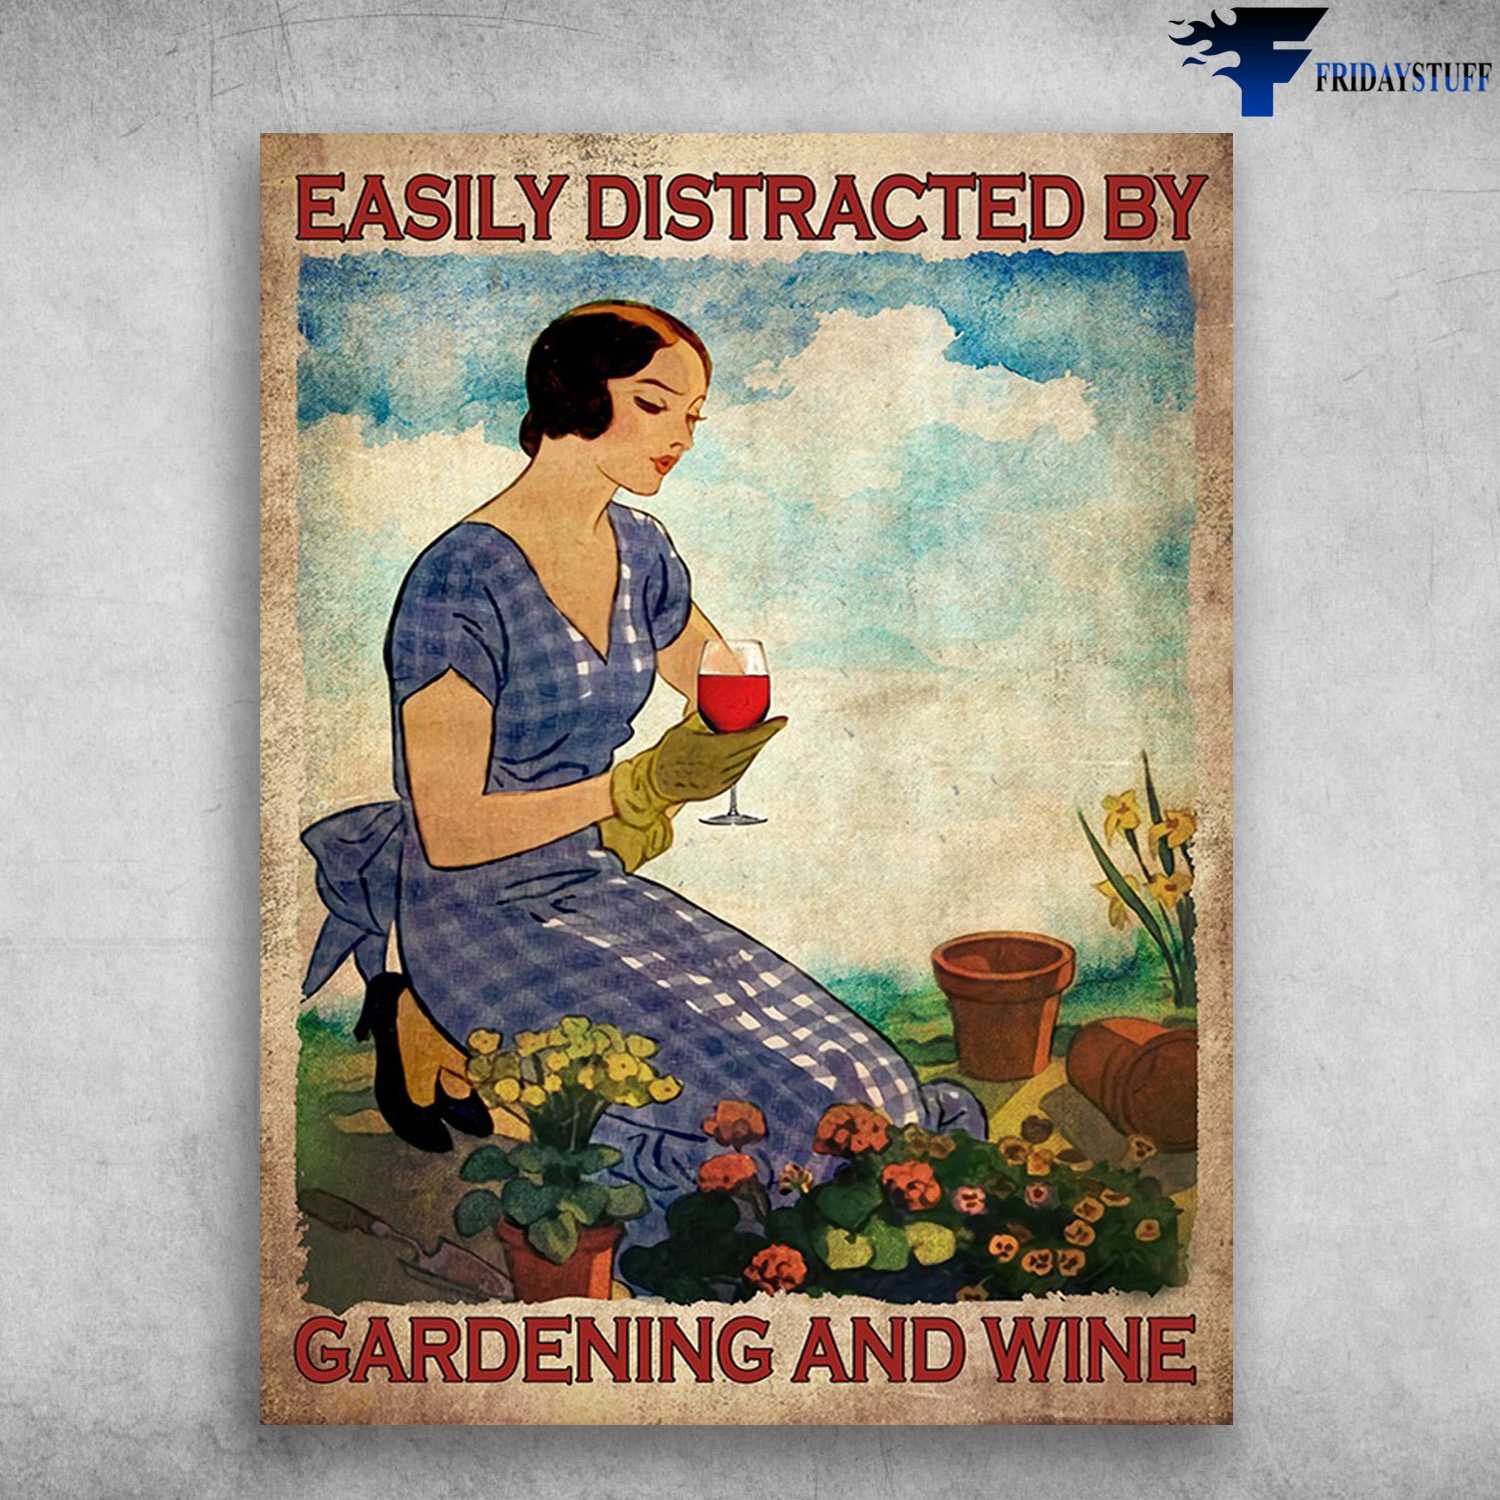 Gardening Lover, Girl Drinks Wine - Easily Distracted By, Gardening And Wine